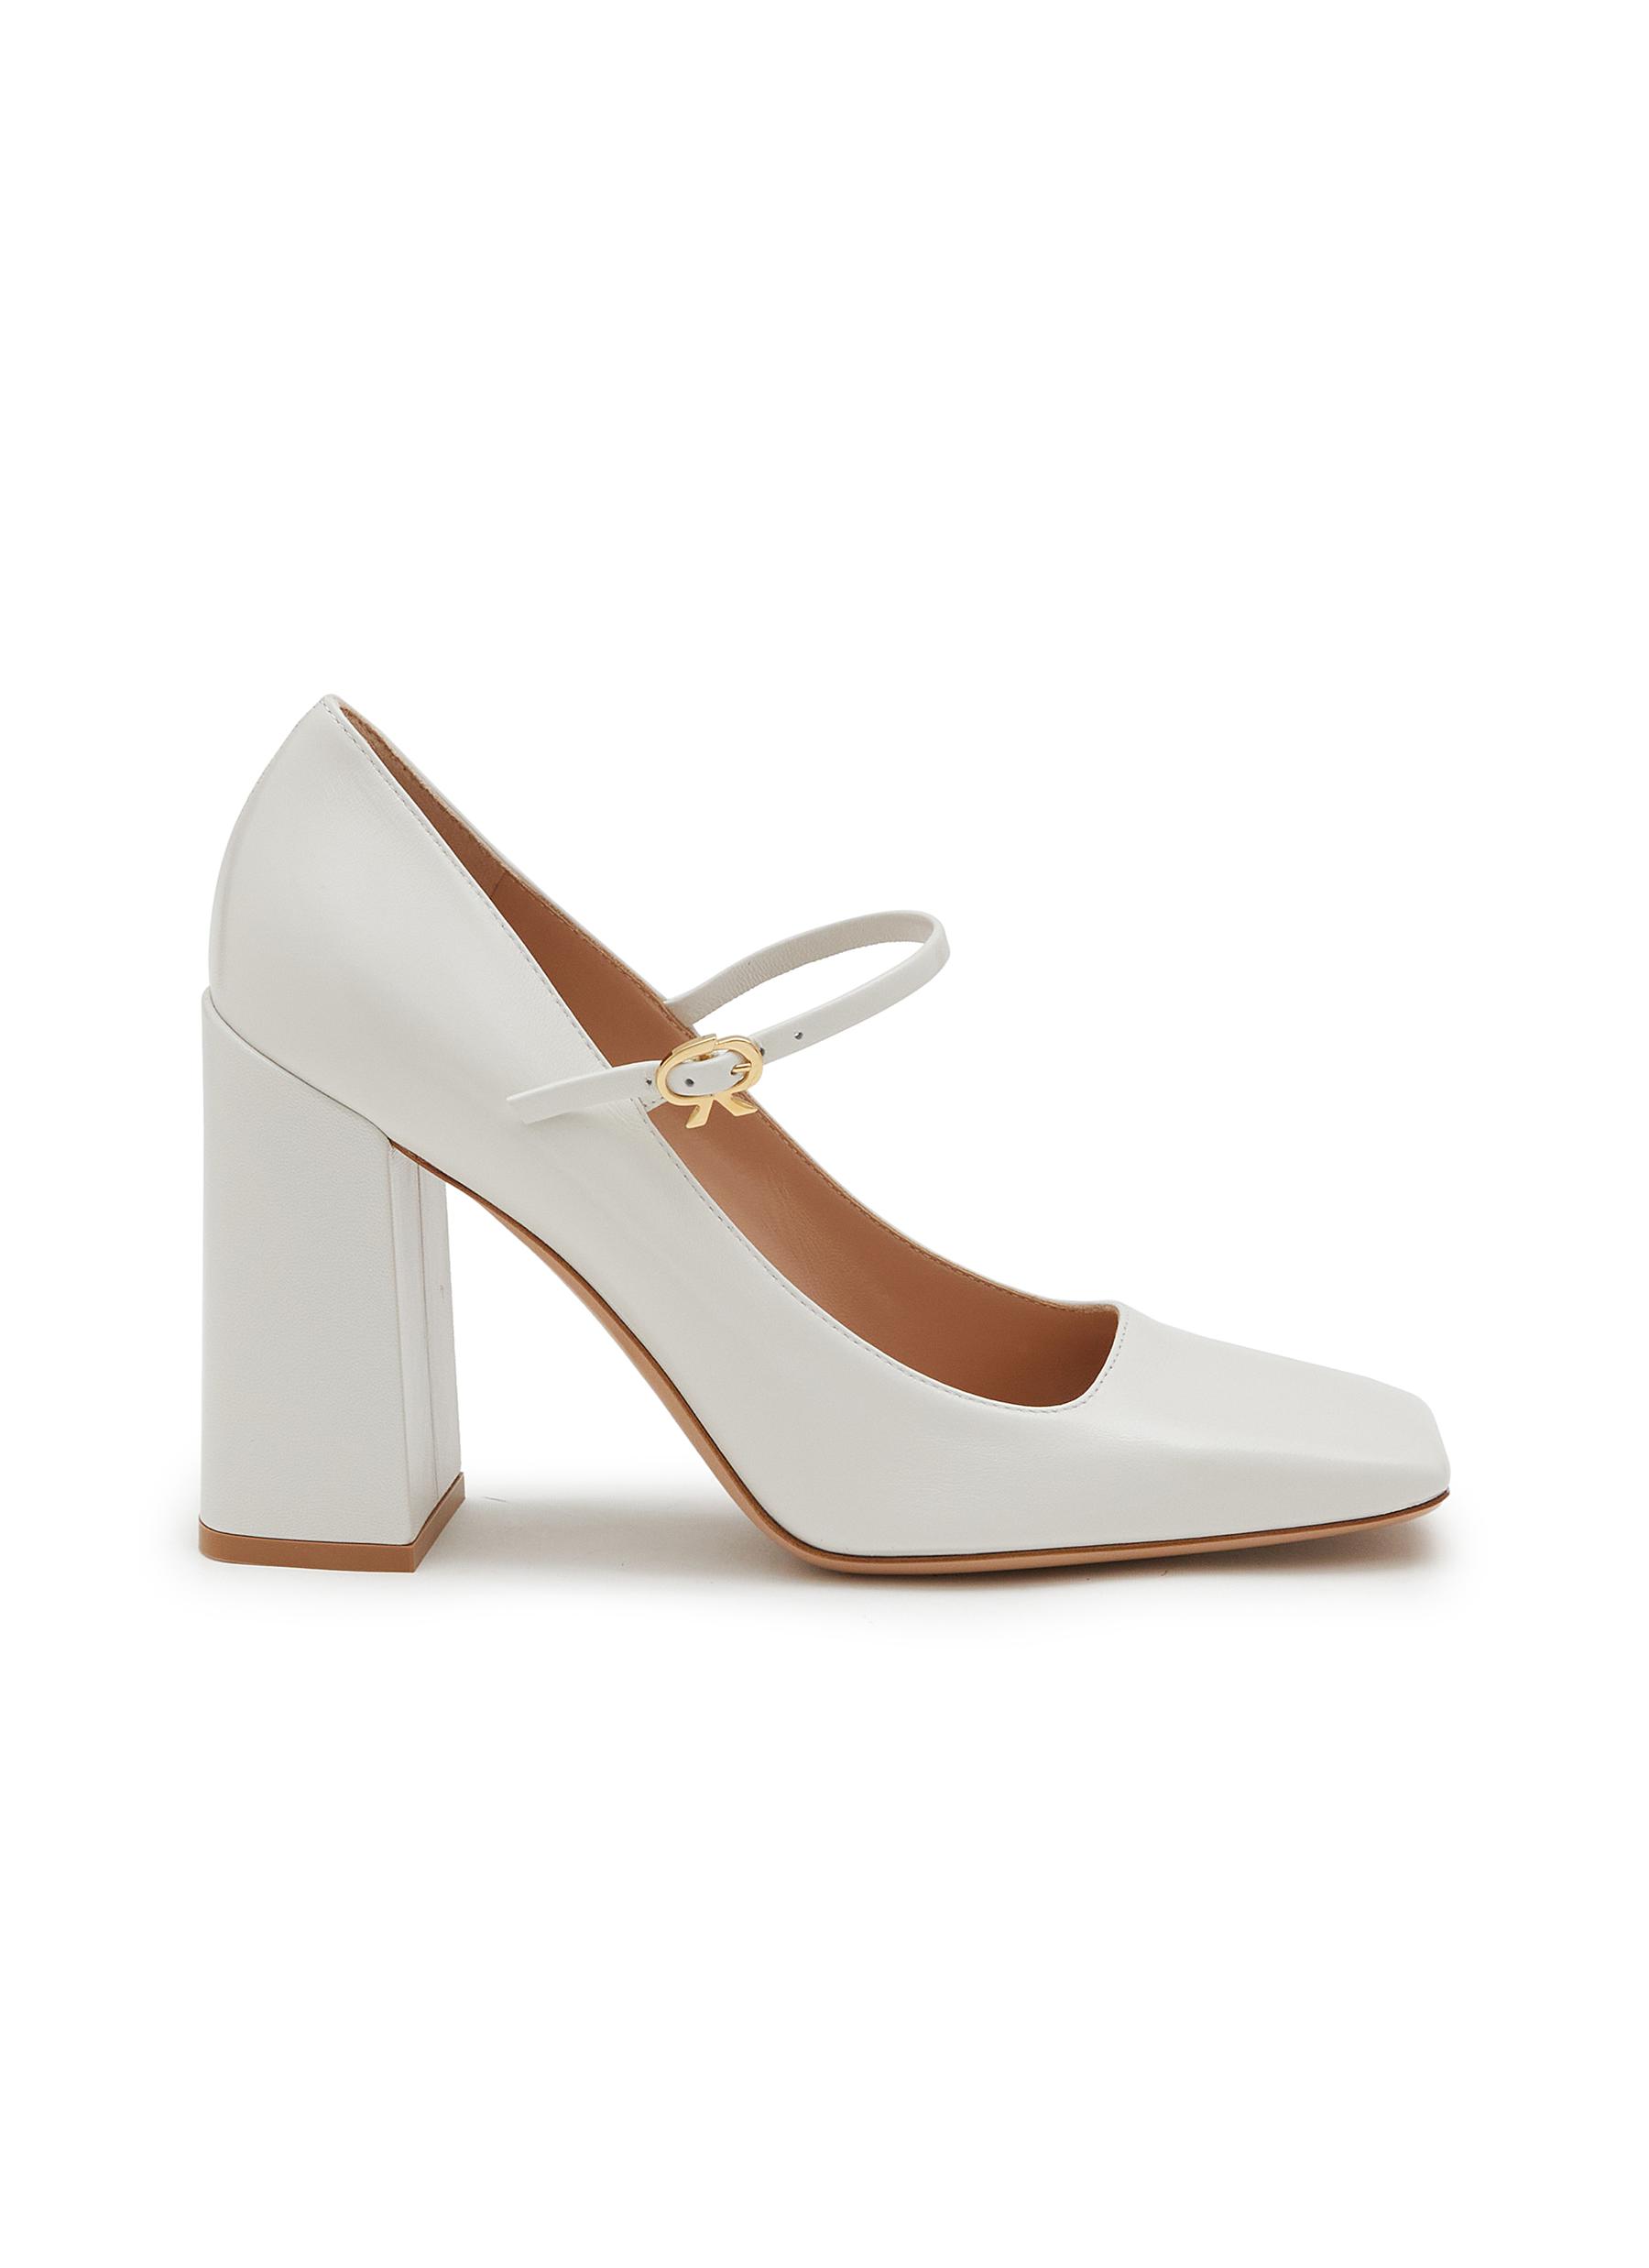 Beira Rio 4298-103 Block Heel Mary-Jane Pump in Off White Napa – Charley  Boutique